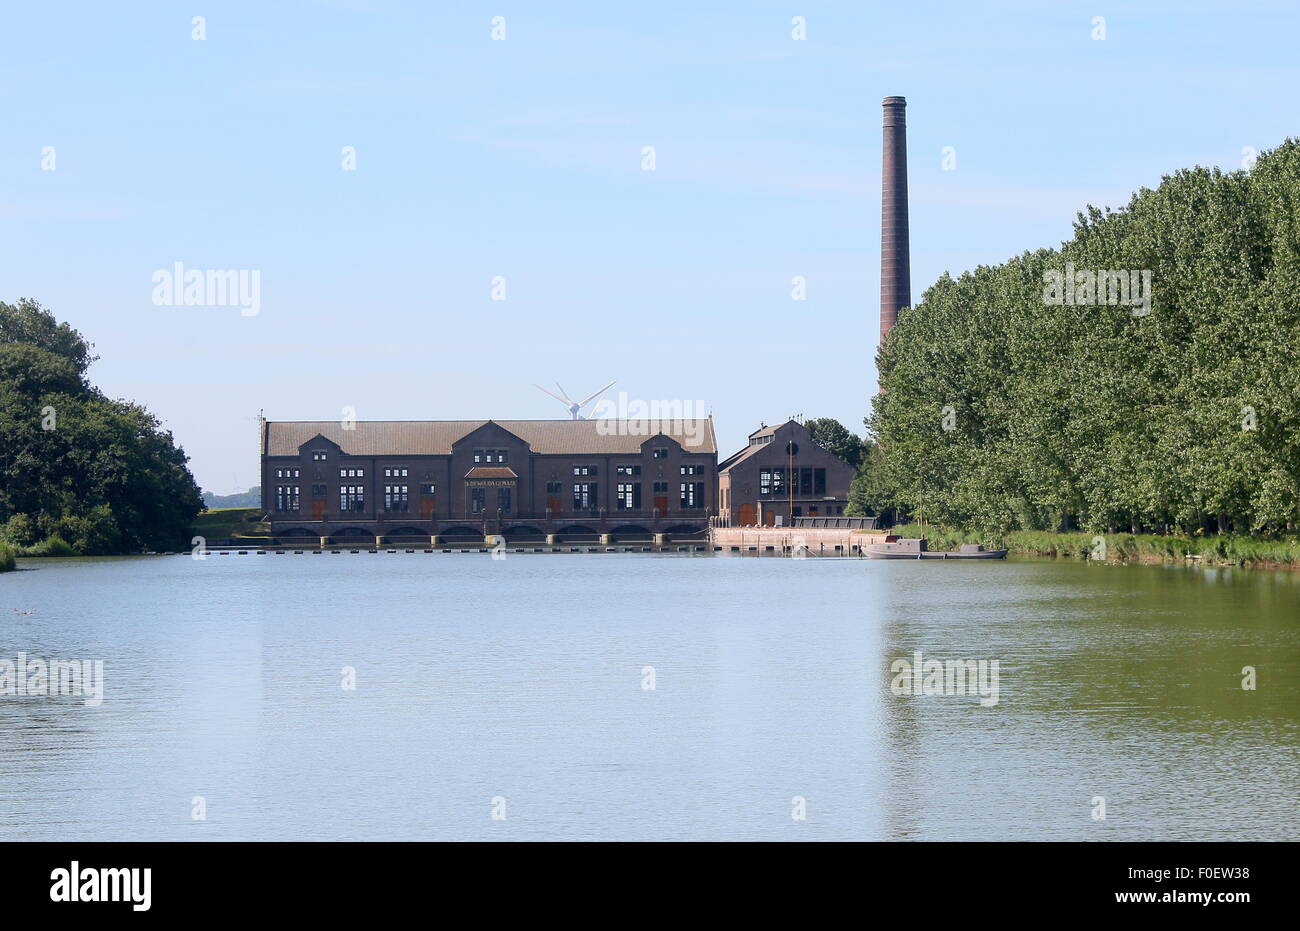 DF Woudagemaal,  largest operational steam-powered pumping station in the world at Lemmer, Netherlands, UNESCO World Heritage Stock Photo